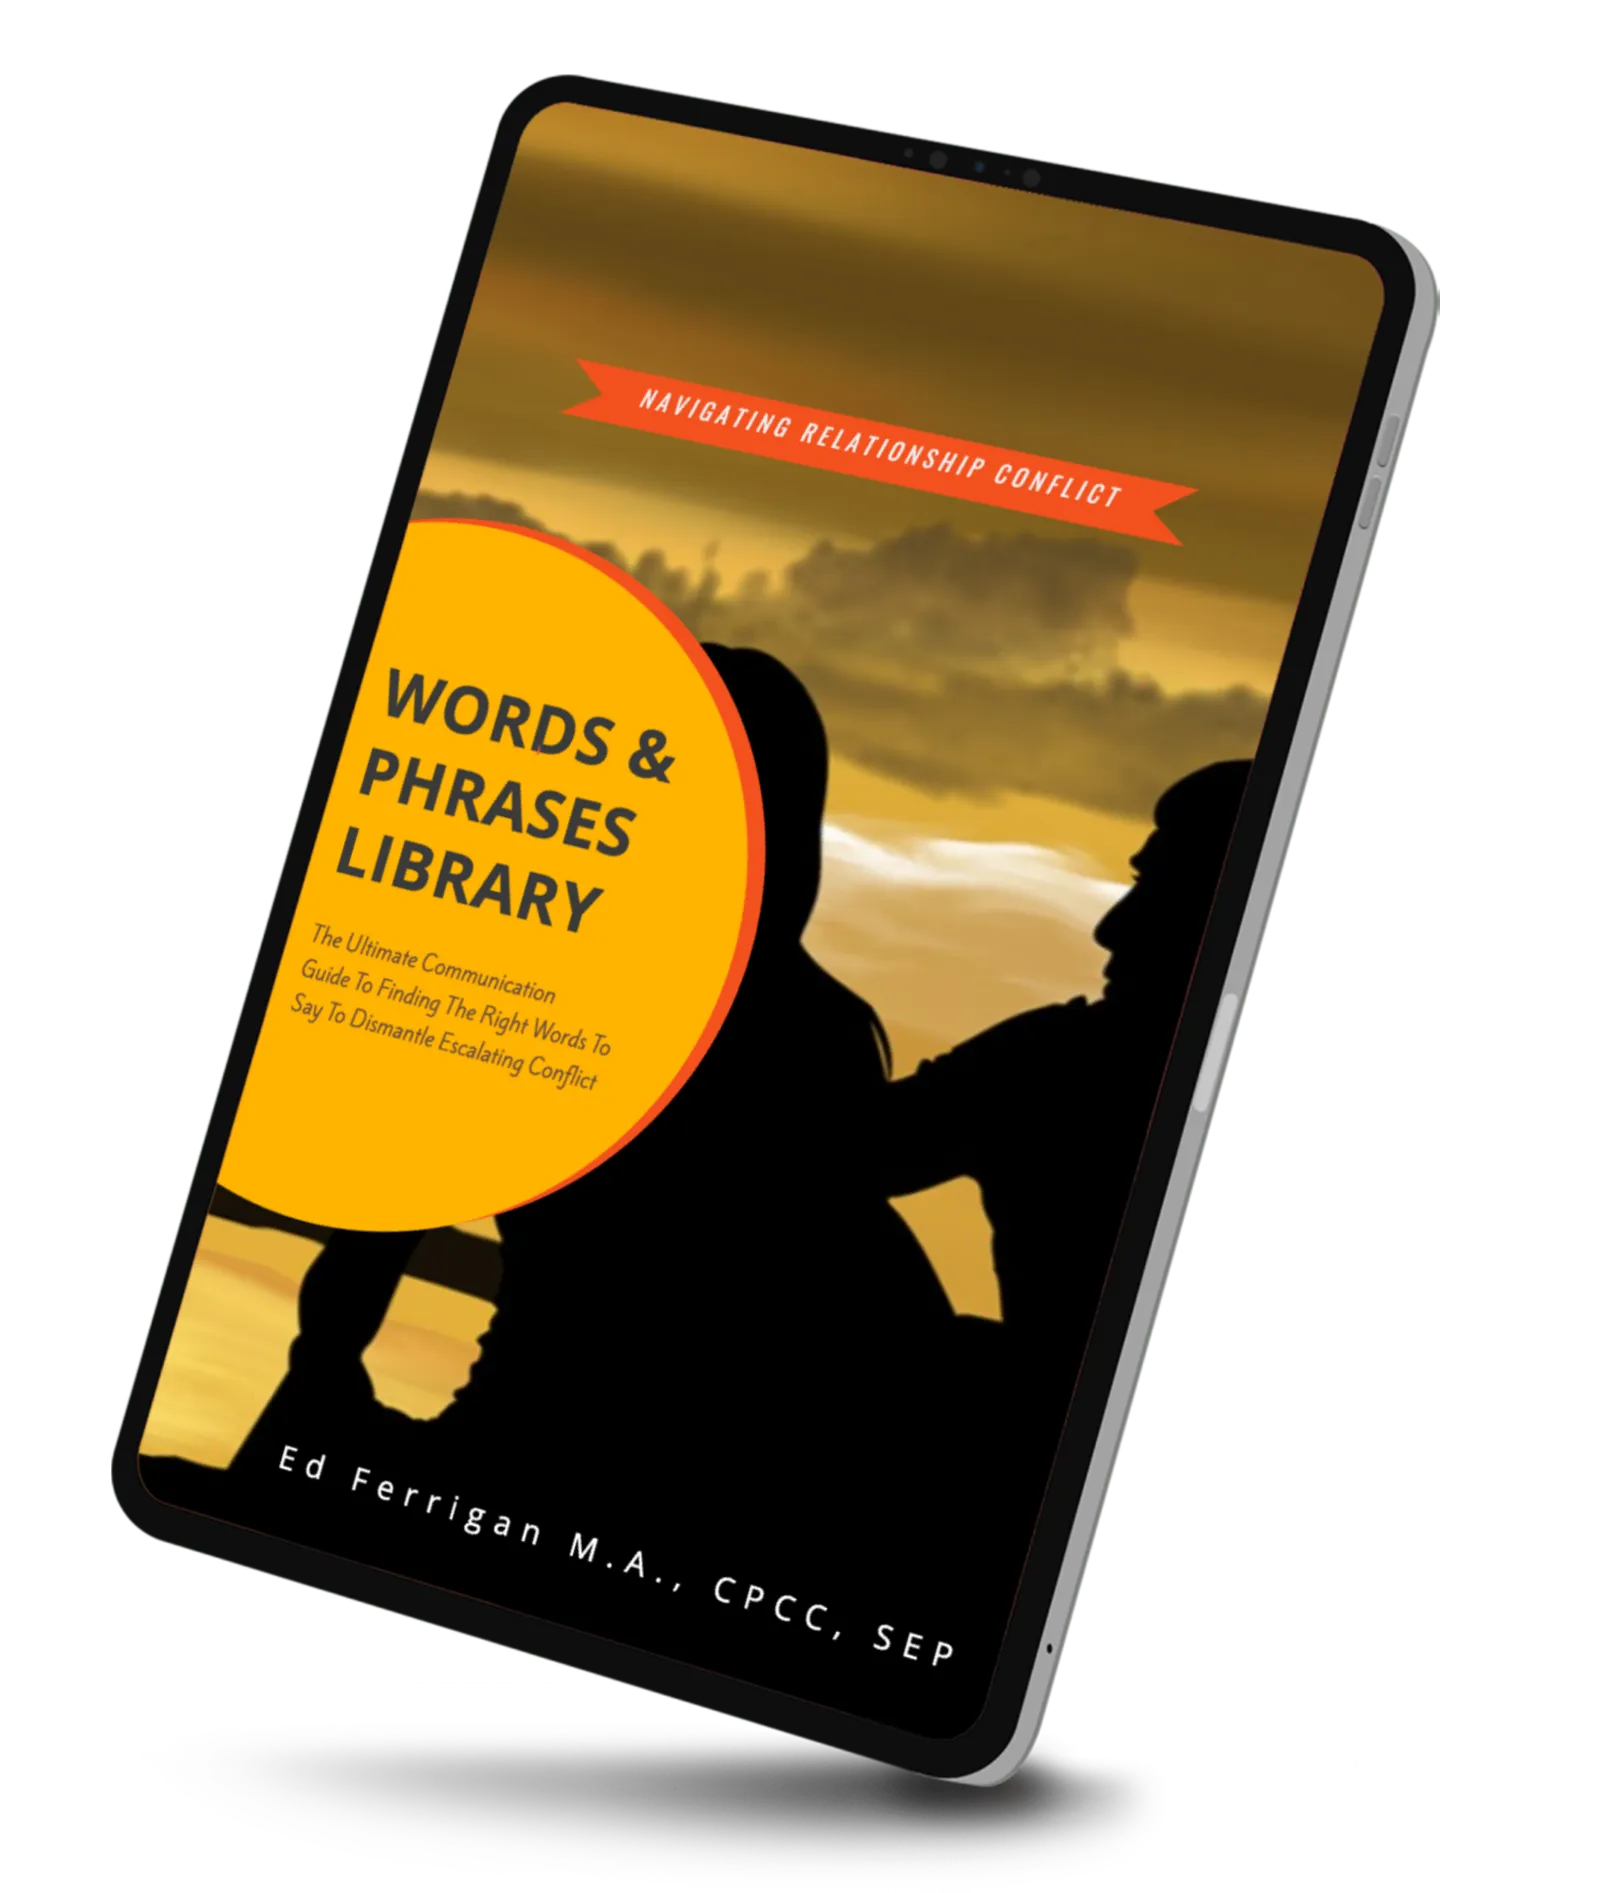 words & phrases library image